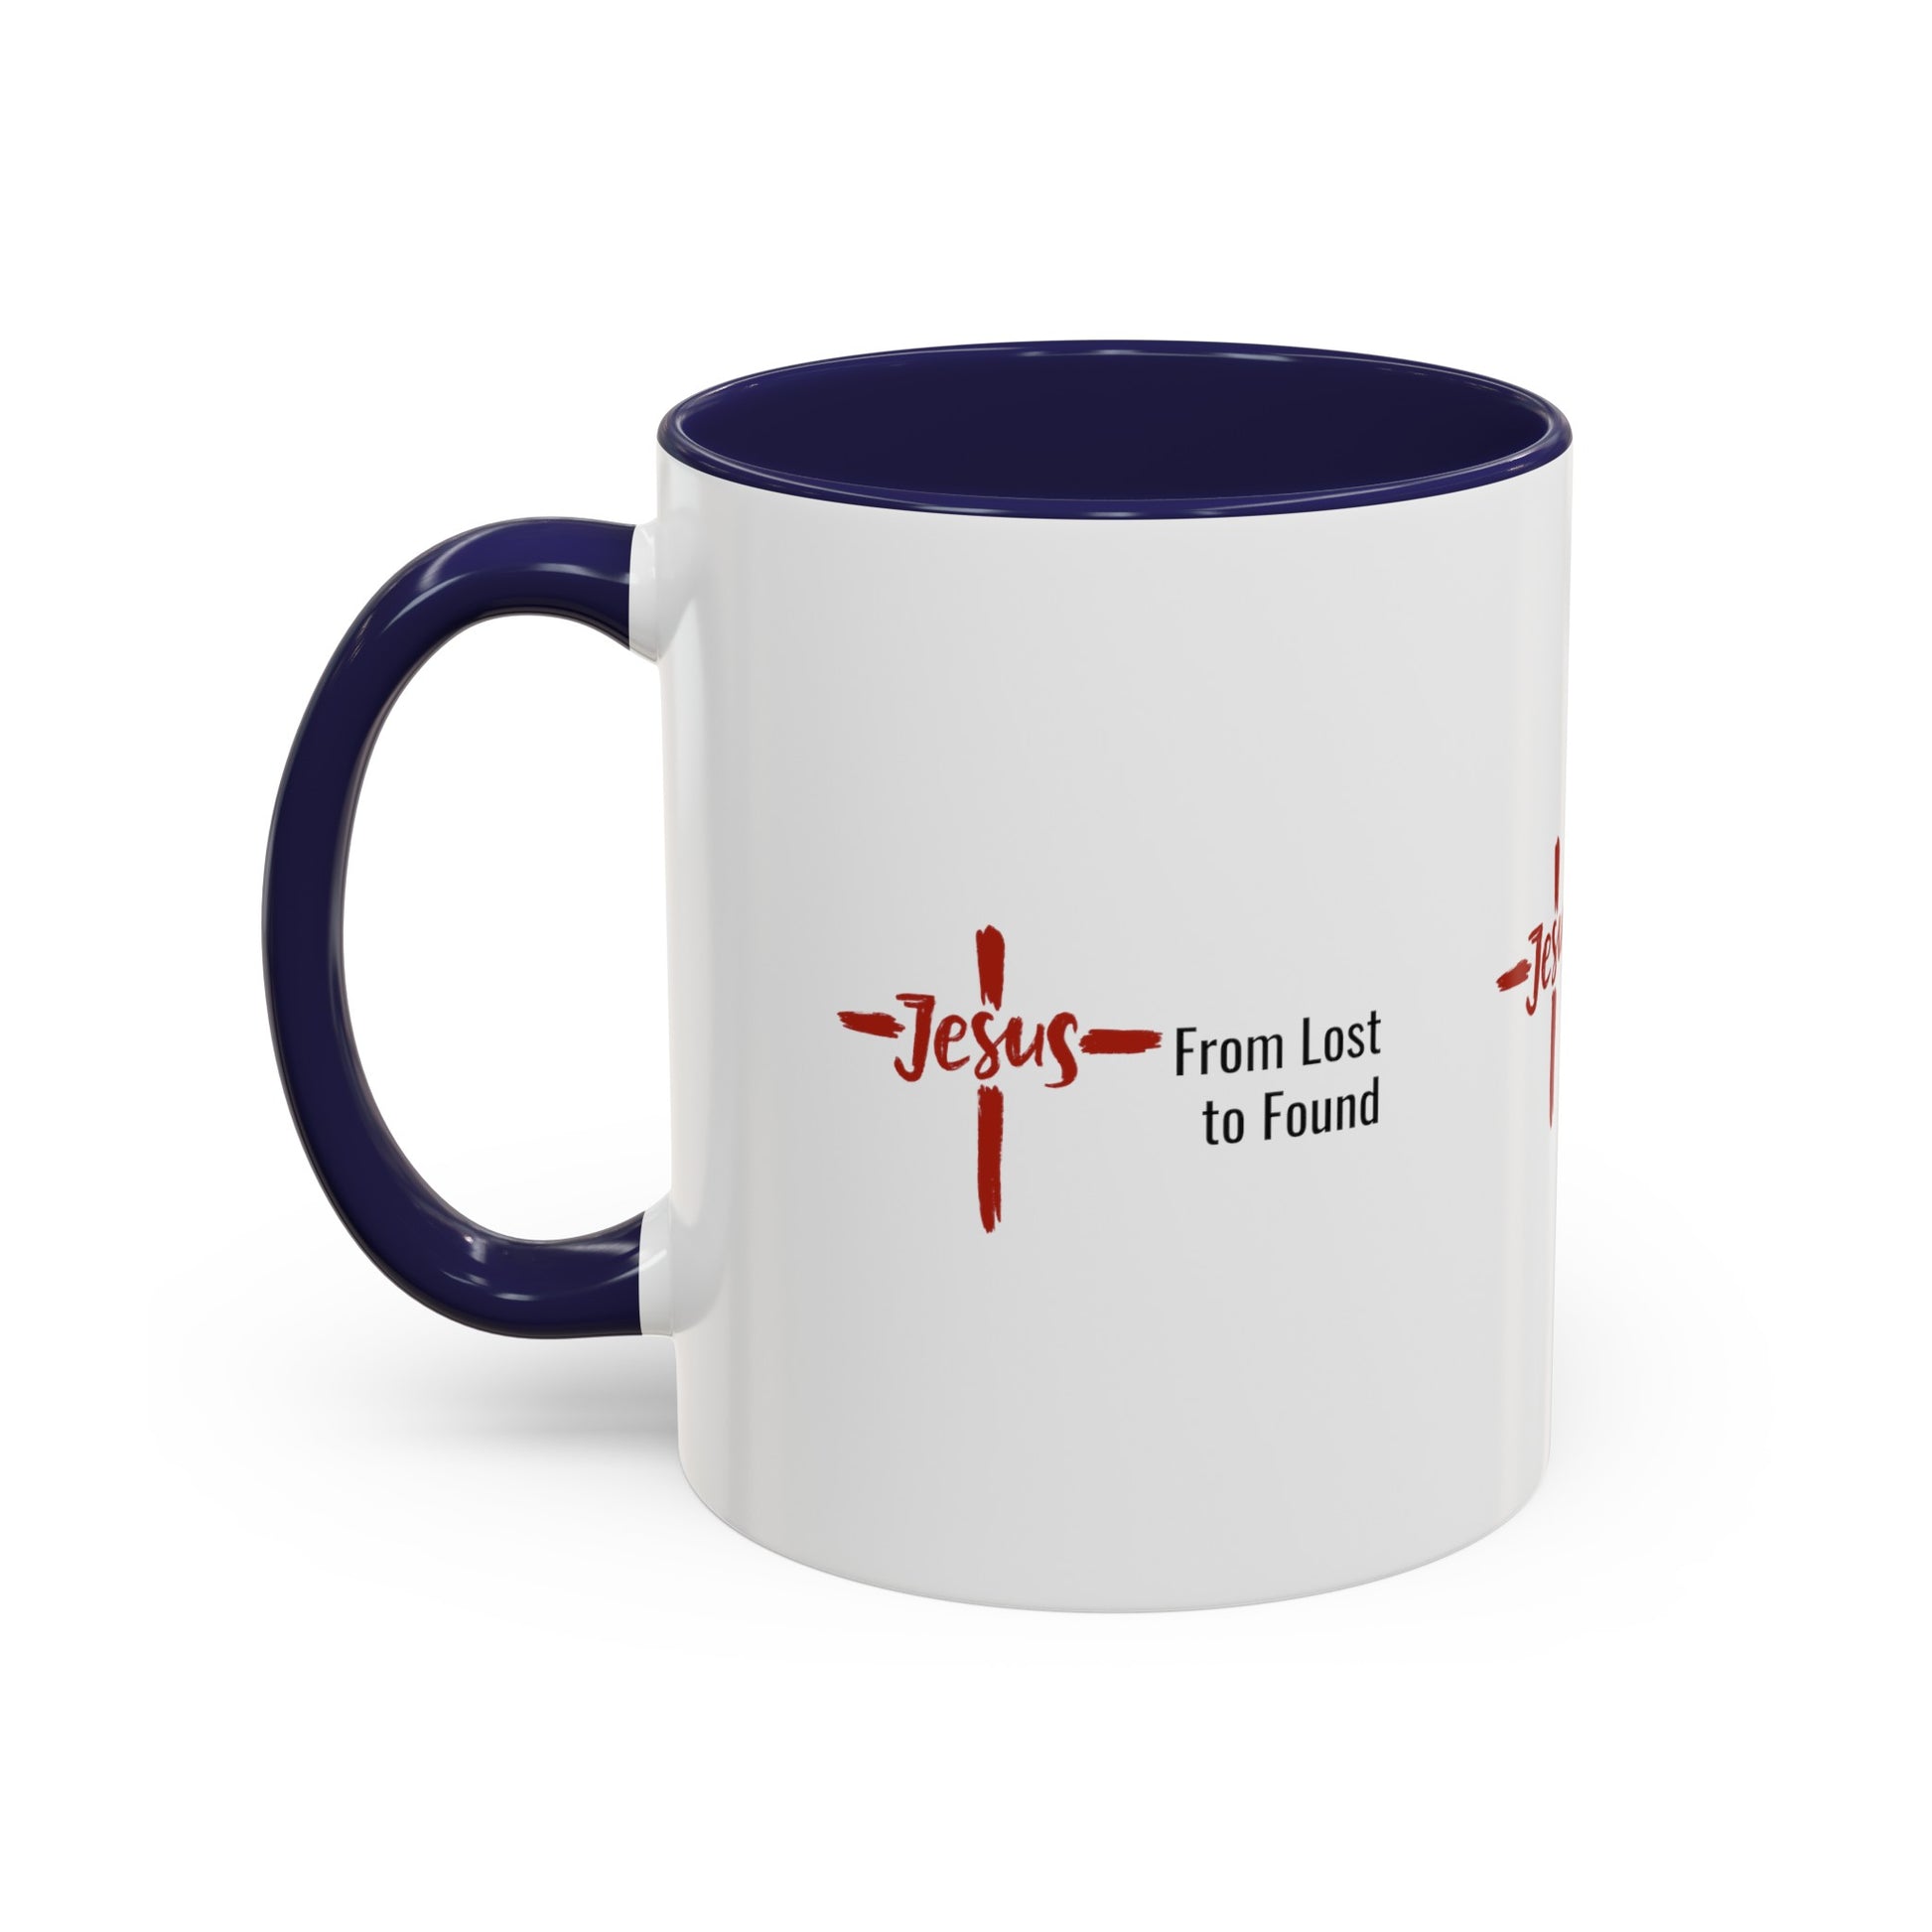 Enjoy sipping your favorite beverage from this Jesus From Lost to Found mug. Shop SmithRidge.farm for #FaithLife merchandise.